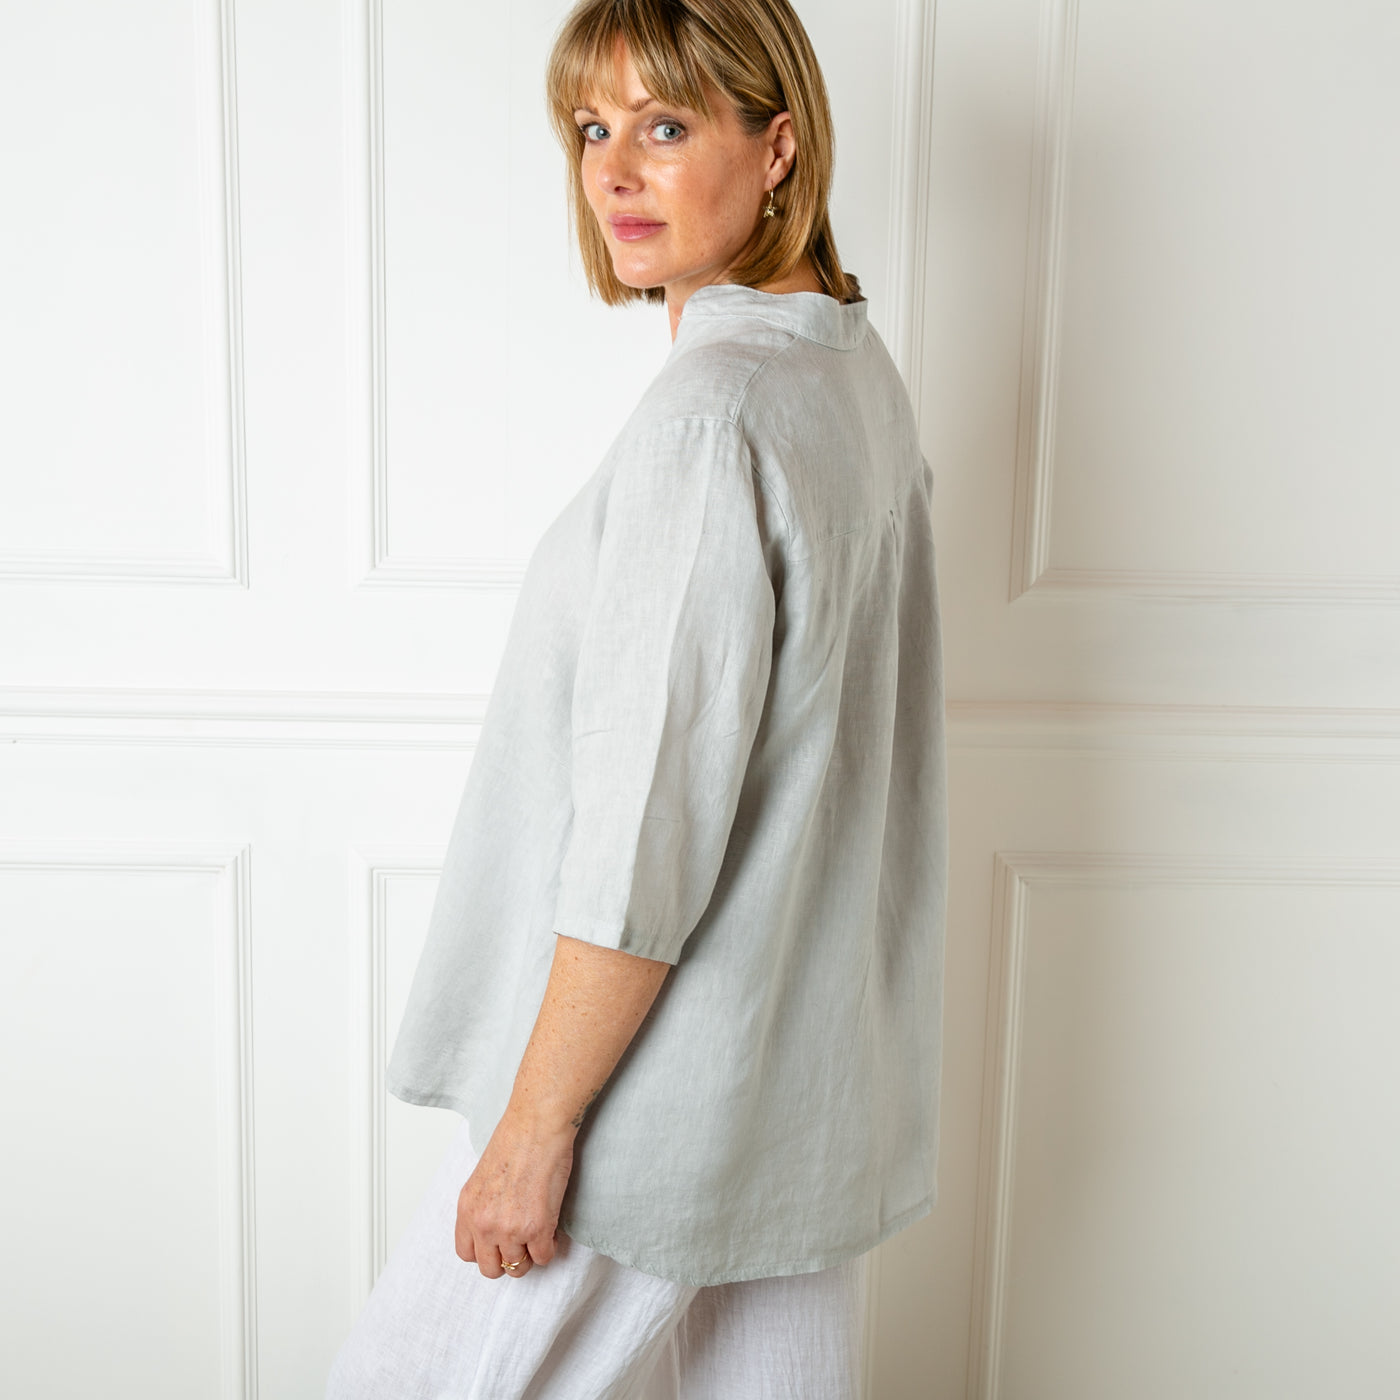 The Linen Tunic Top in dove grey which is perfect for a relaxed summer look 